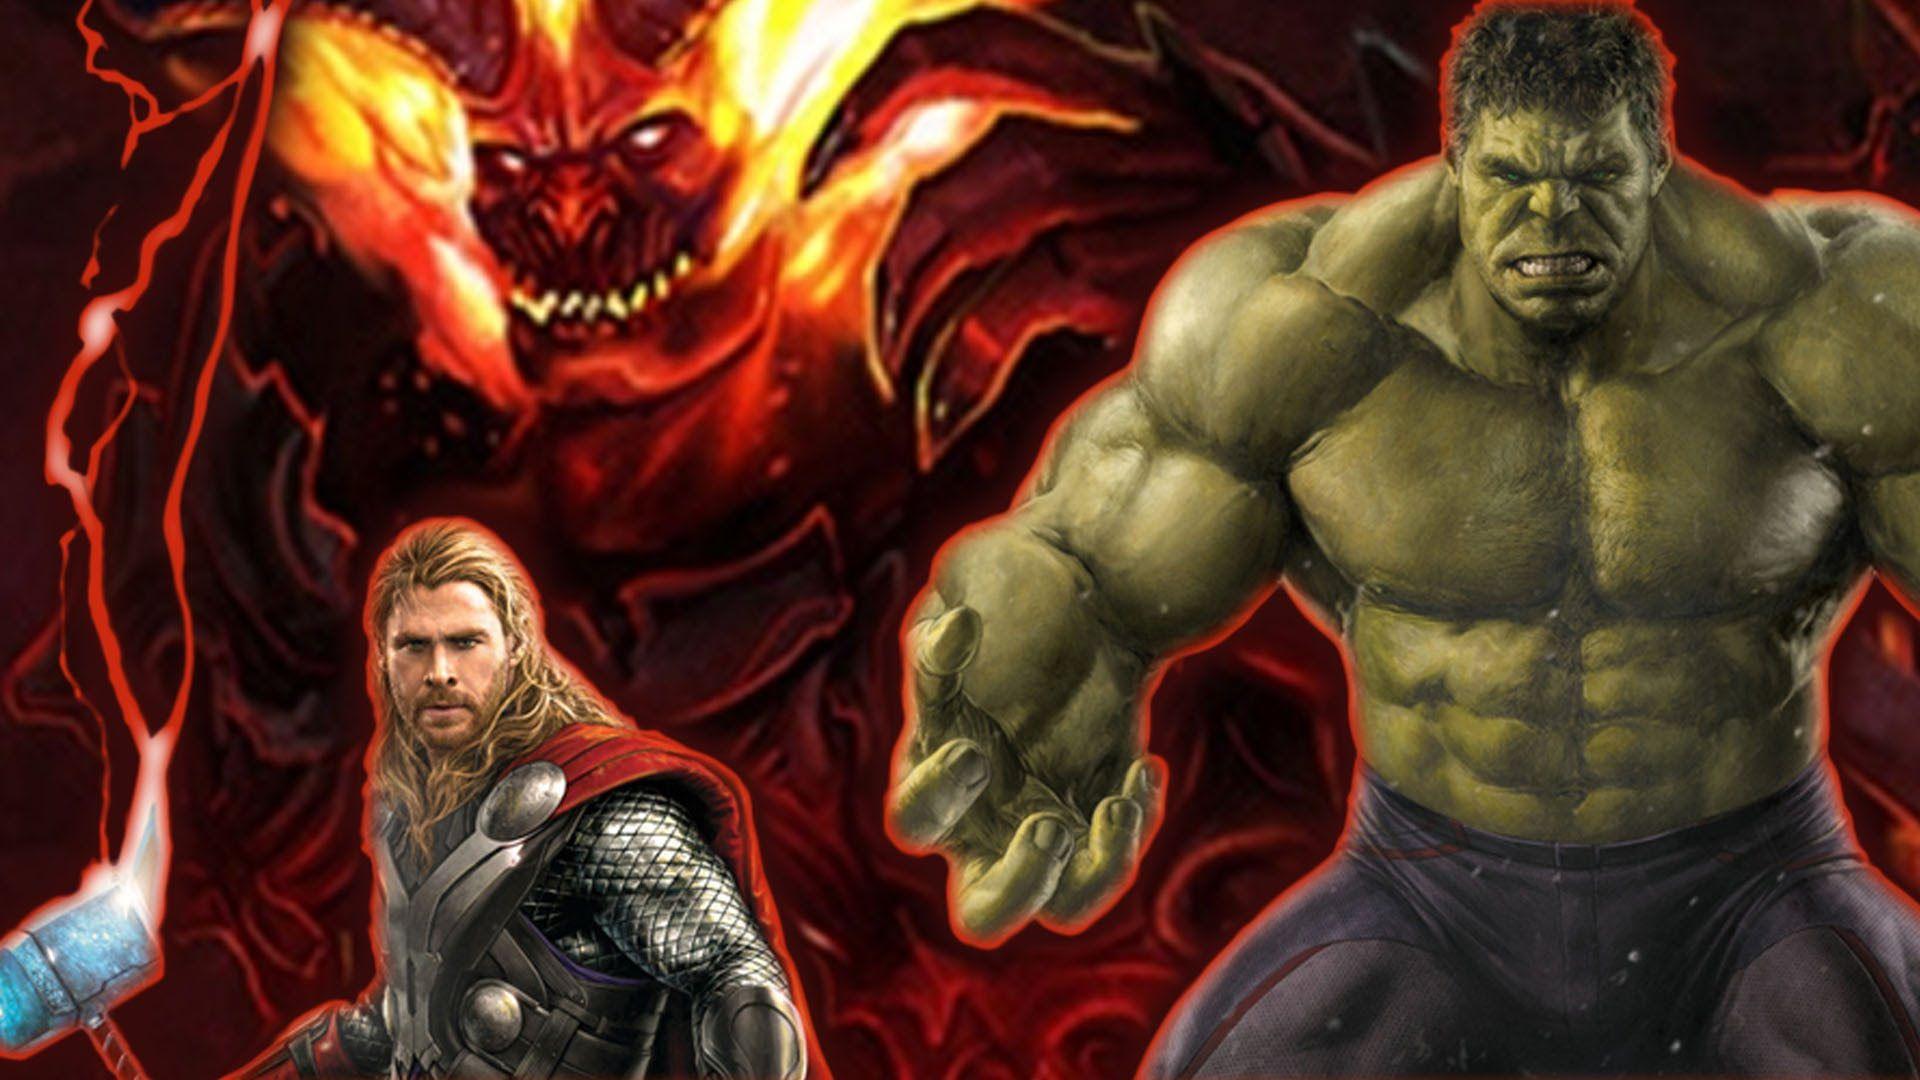 Elements from Planet Hulk to appear in Thor: Ragnarok?